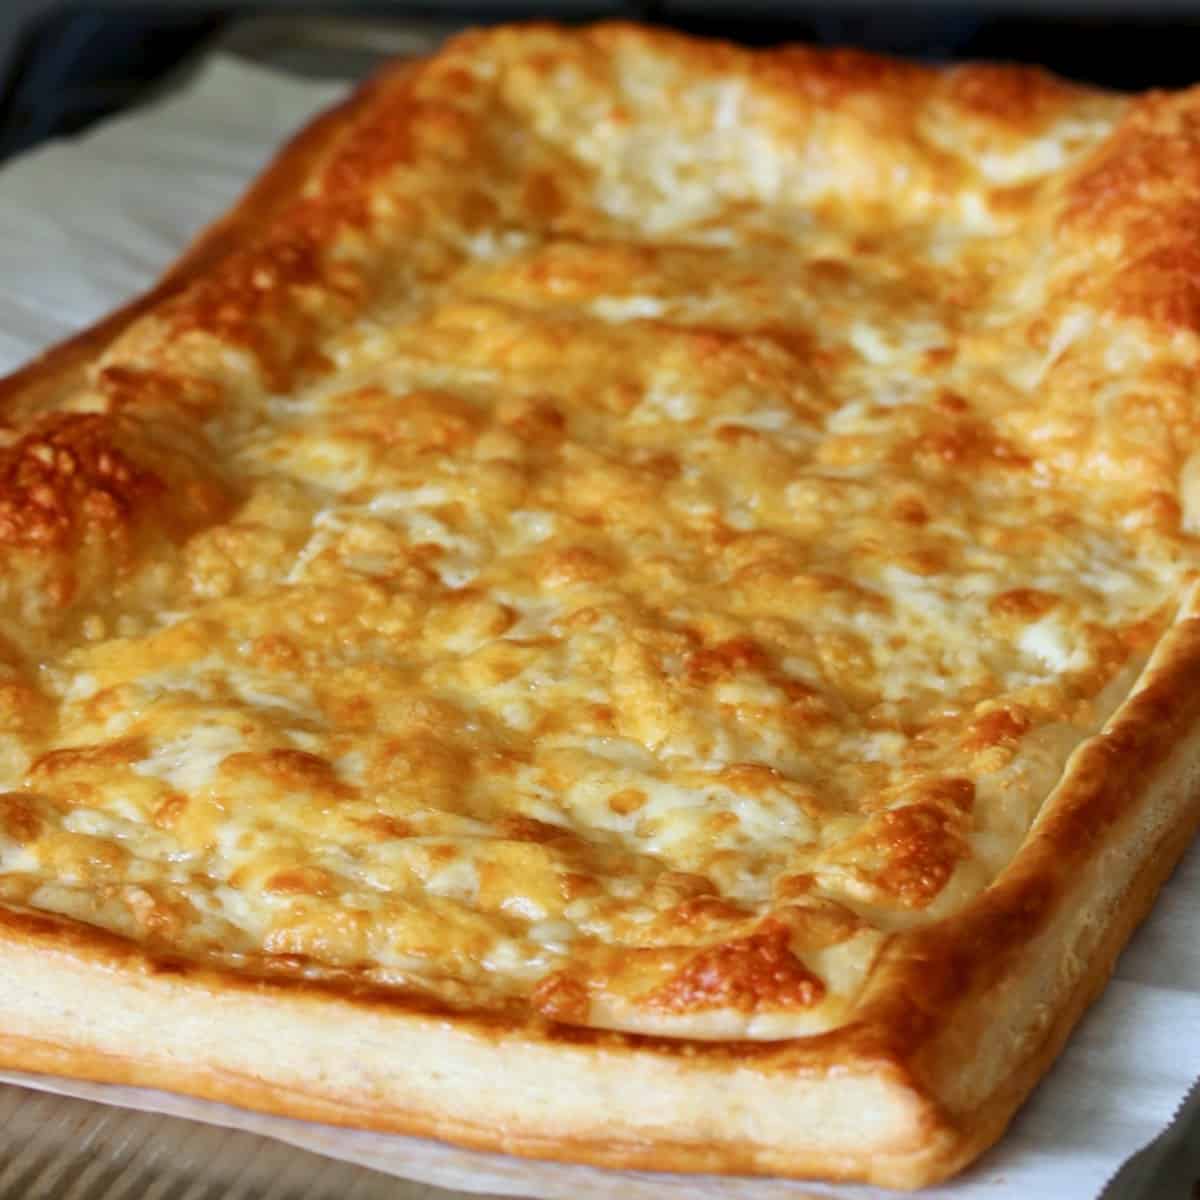 Baked pastry.